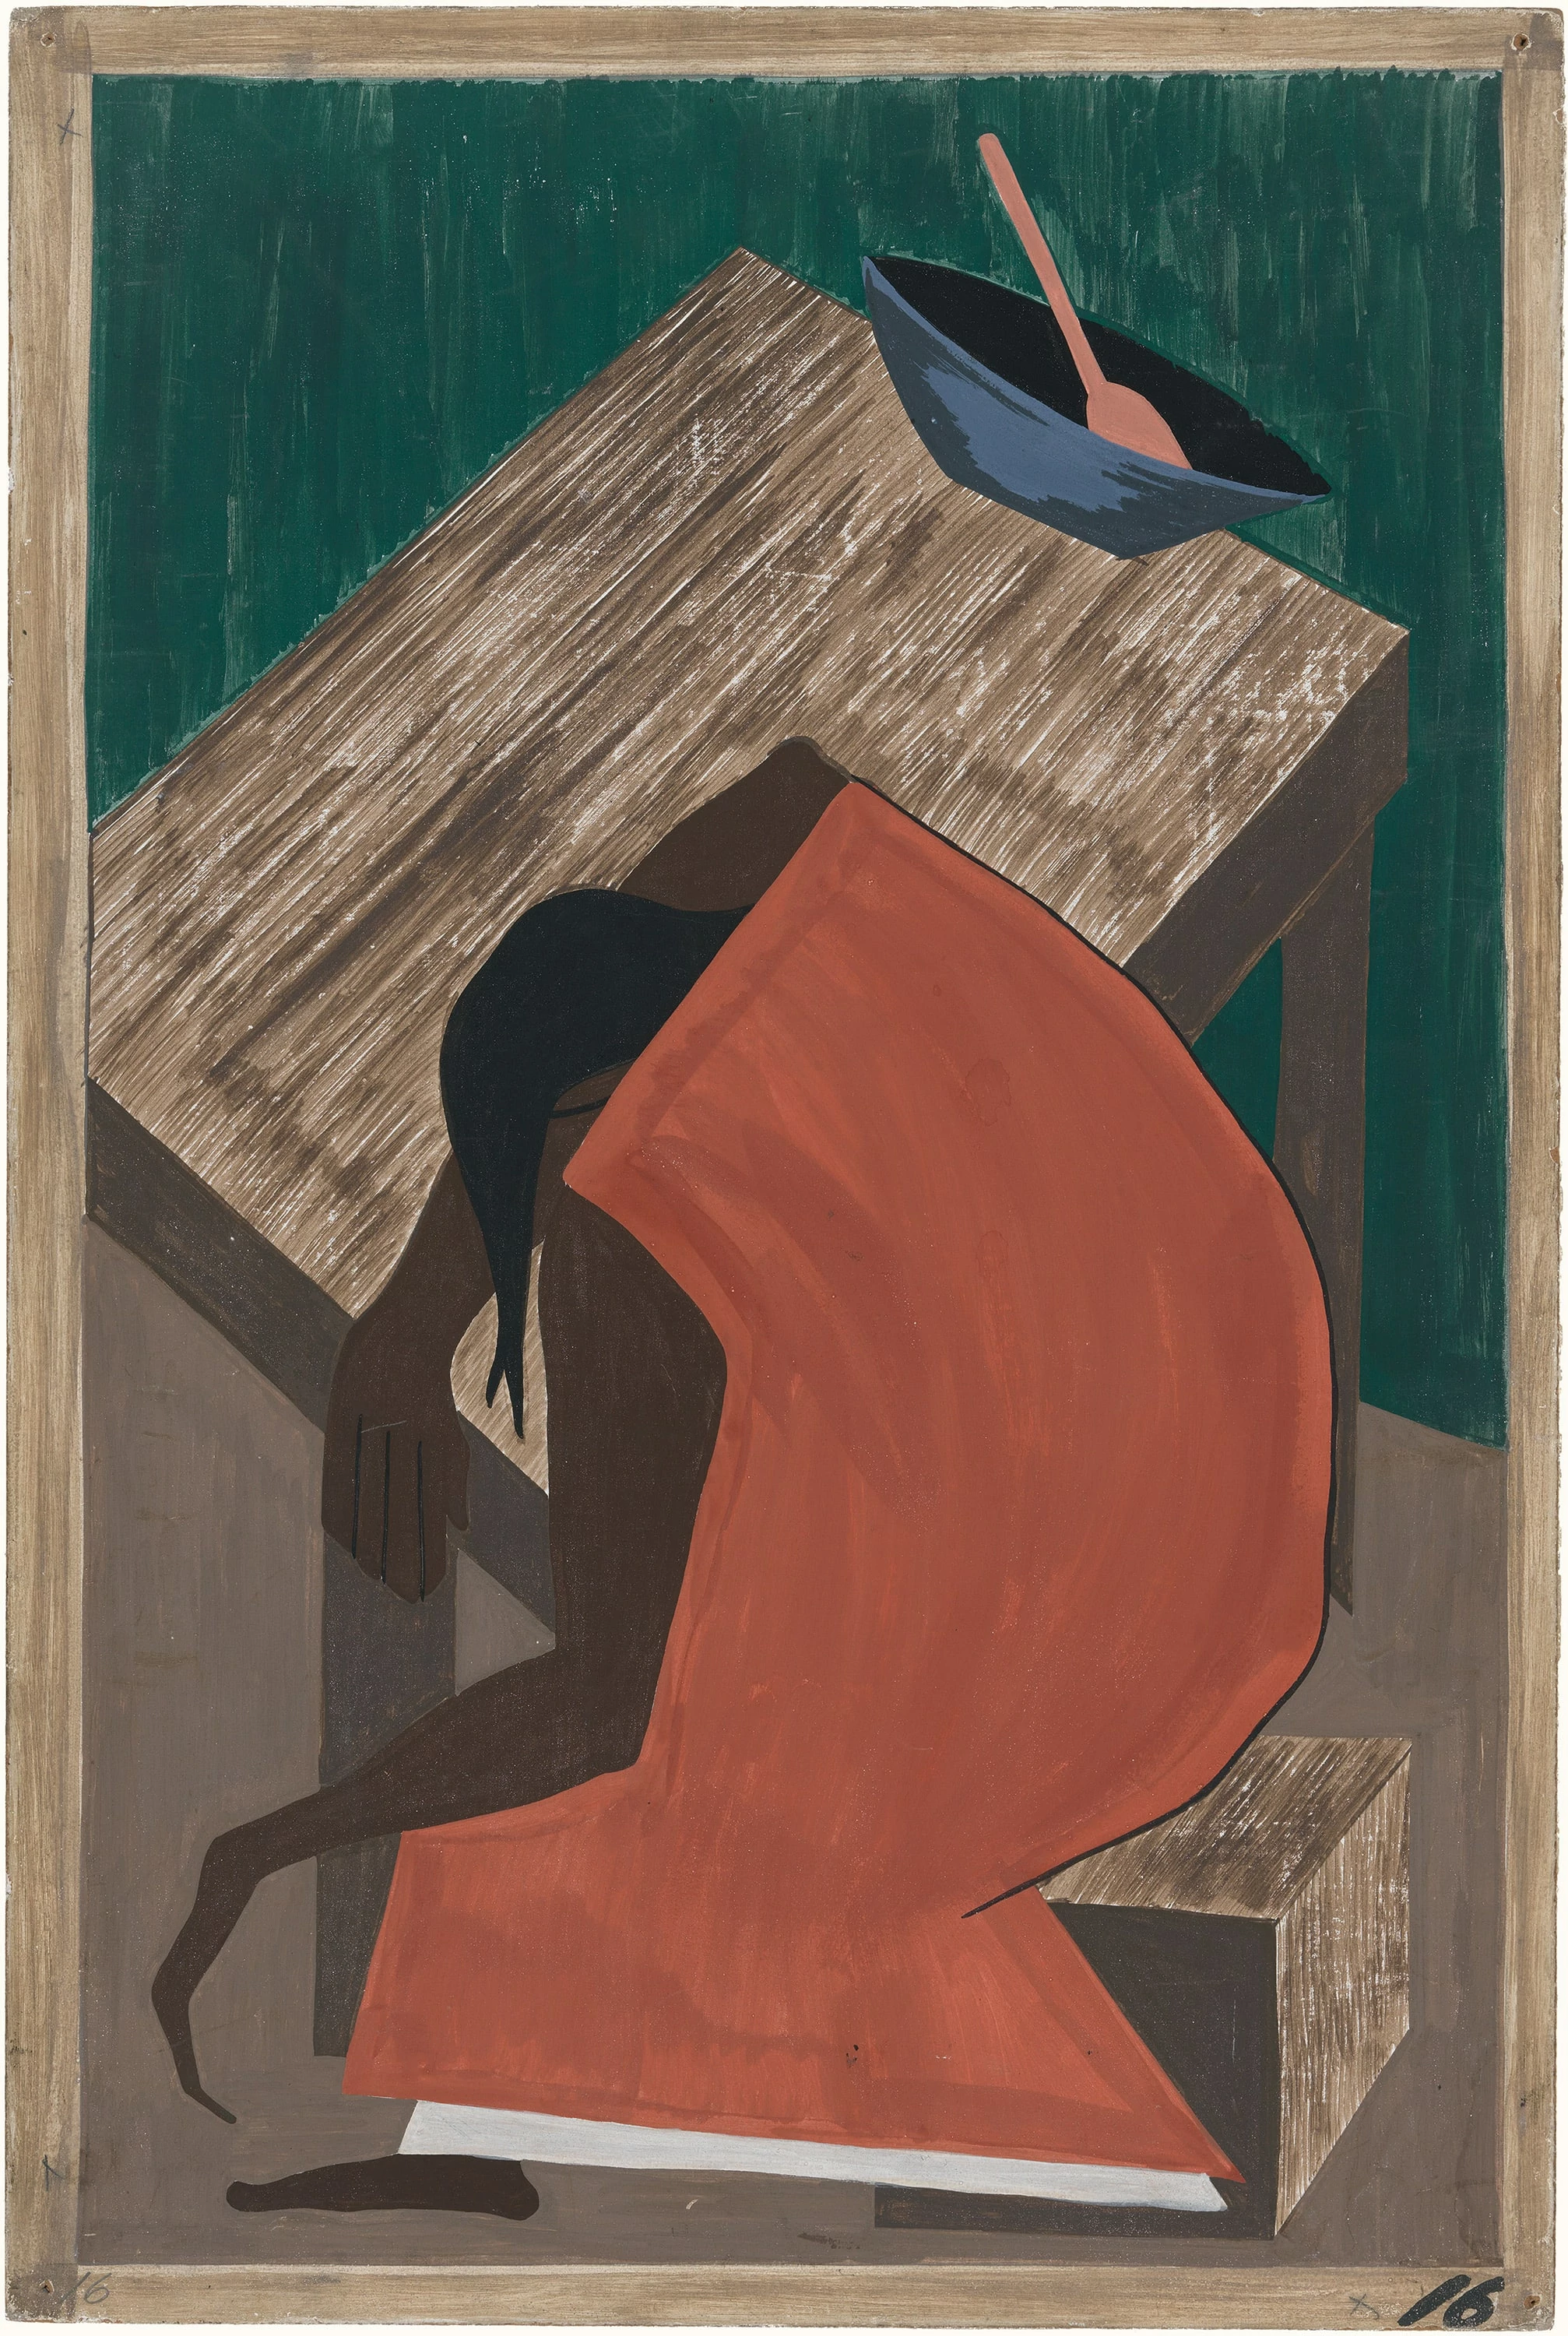 Migration Series No.16: After a lynching the migration quickened, Jacob Lawrence